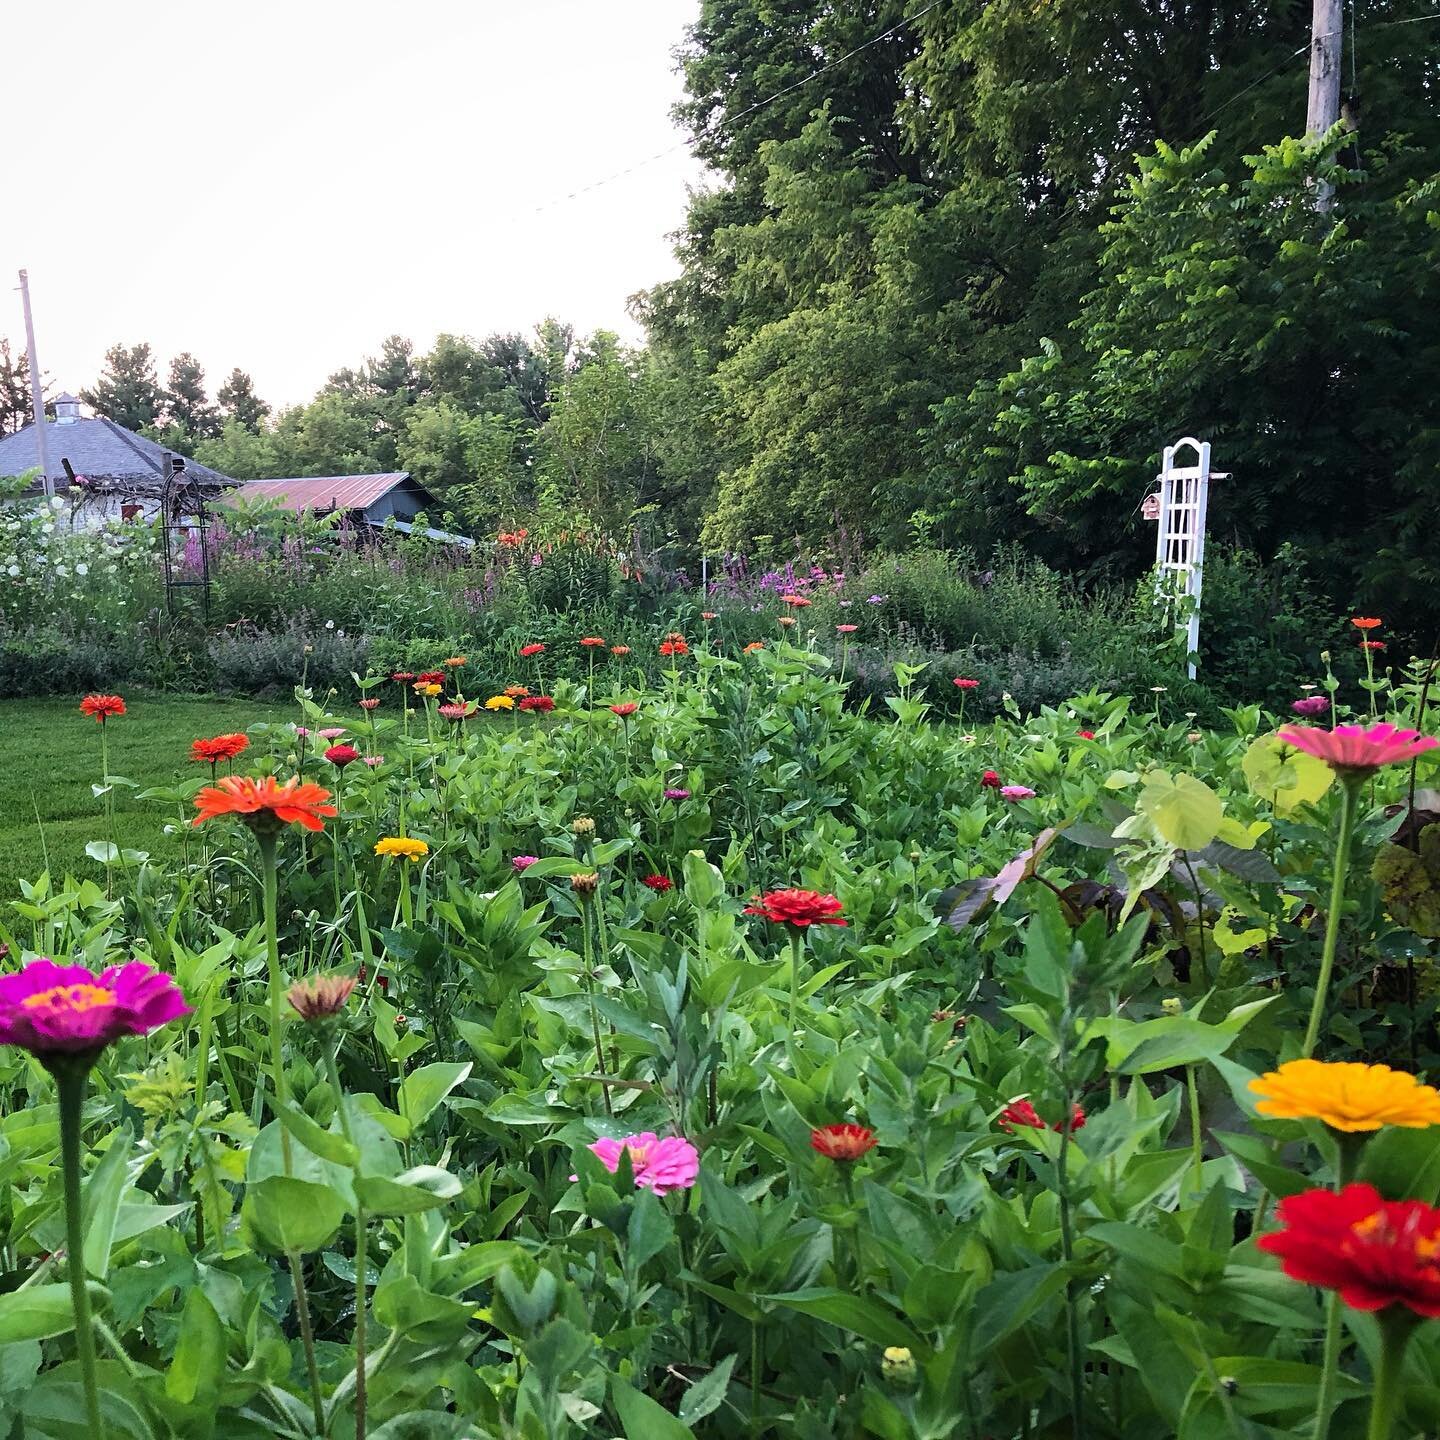 &lsquo;Benary&rsquo;s Giant&rsquo; zinnia bonanza! We started 72 plants from seed in March and now they&rsquo;re in full bloom! So fun/easy to grow from seed! 🌱